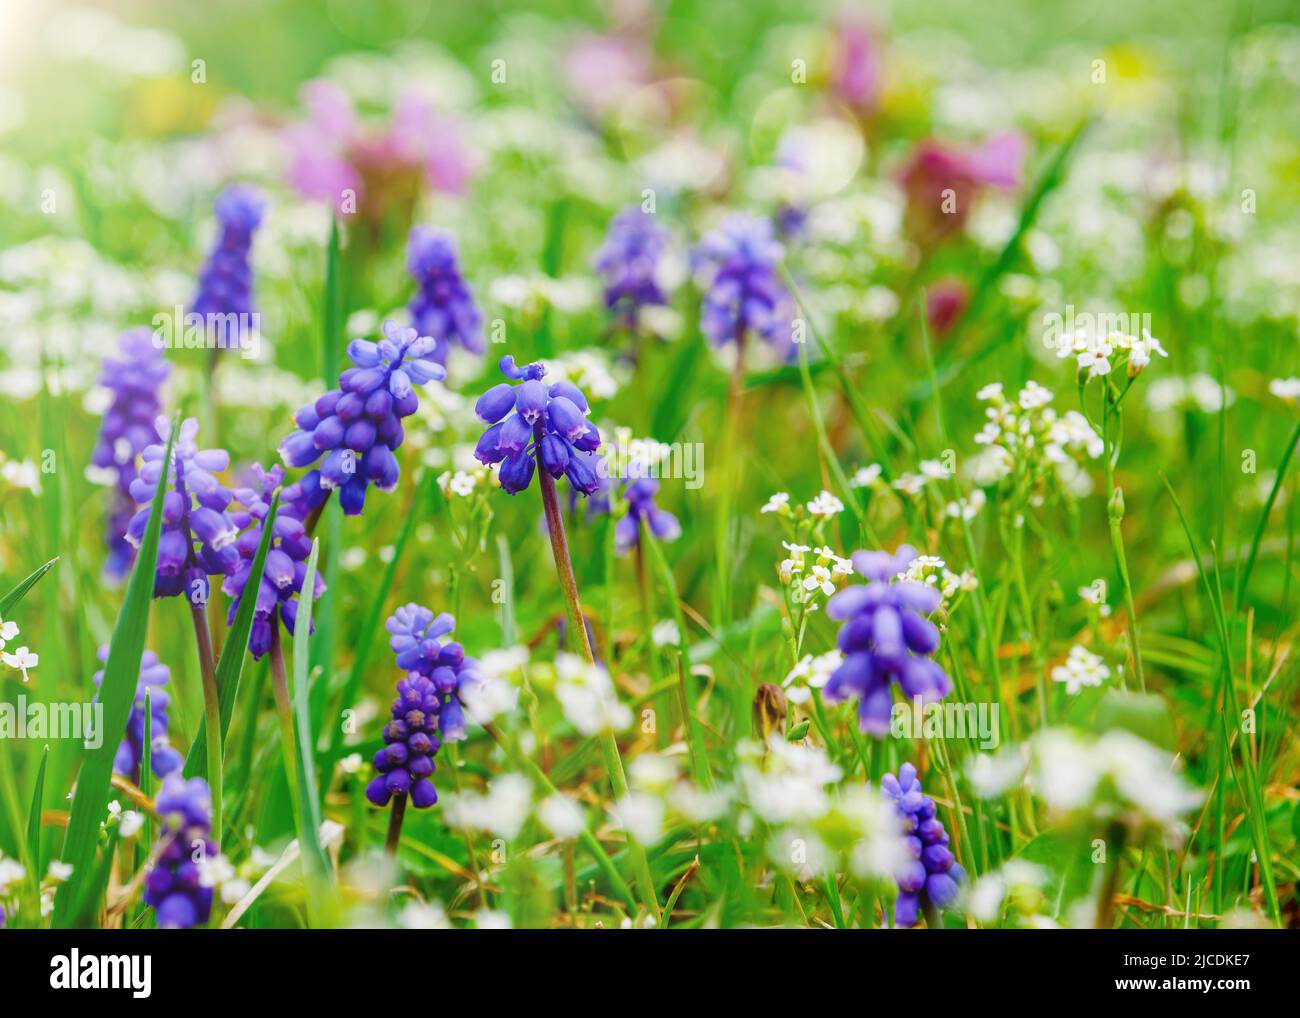 Spring garden background with muscari flowers in sunny day Stock Photo